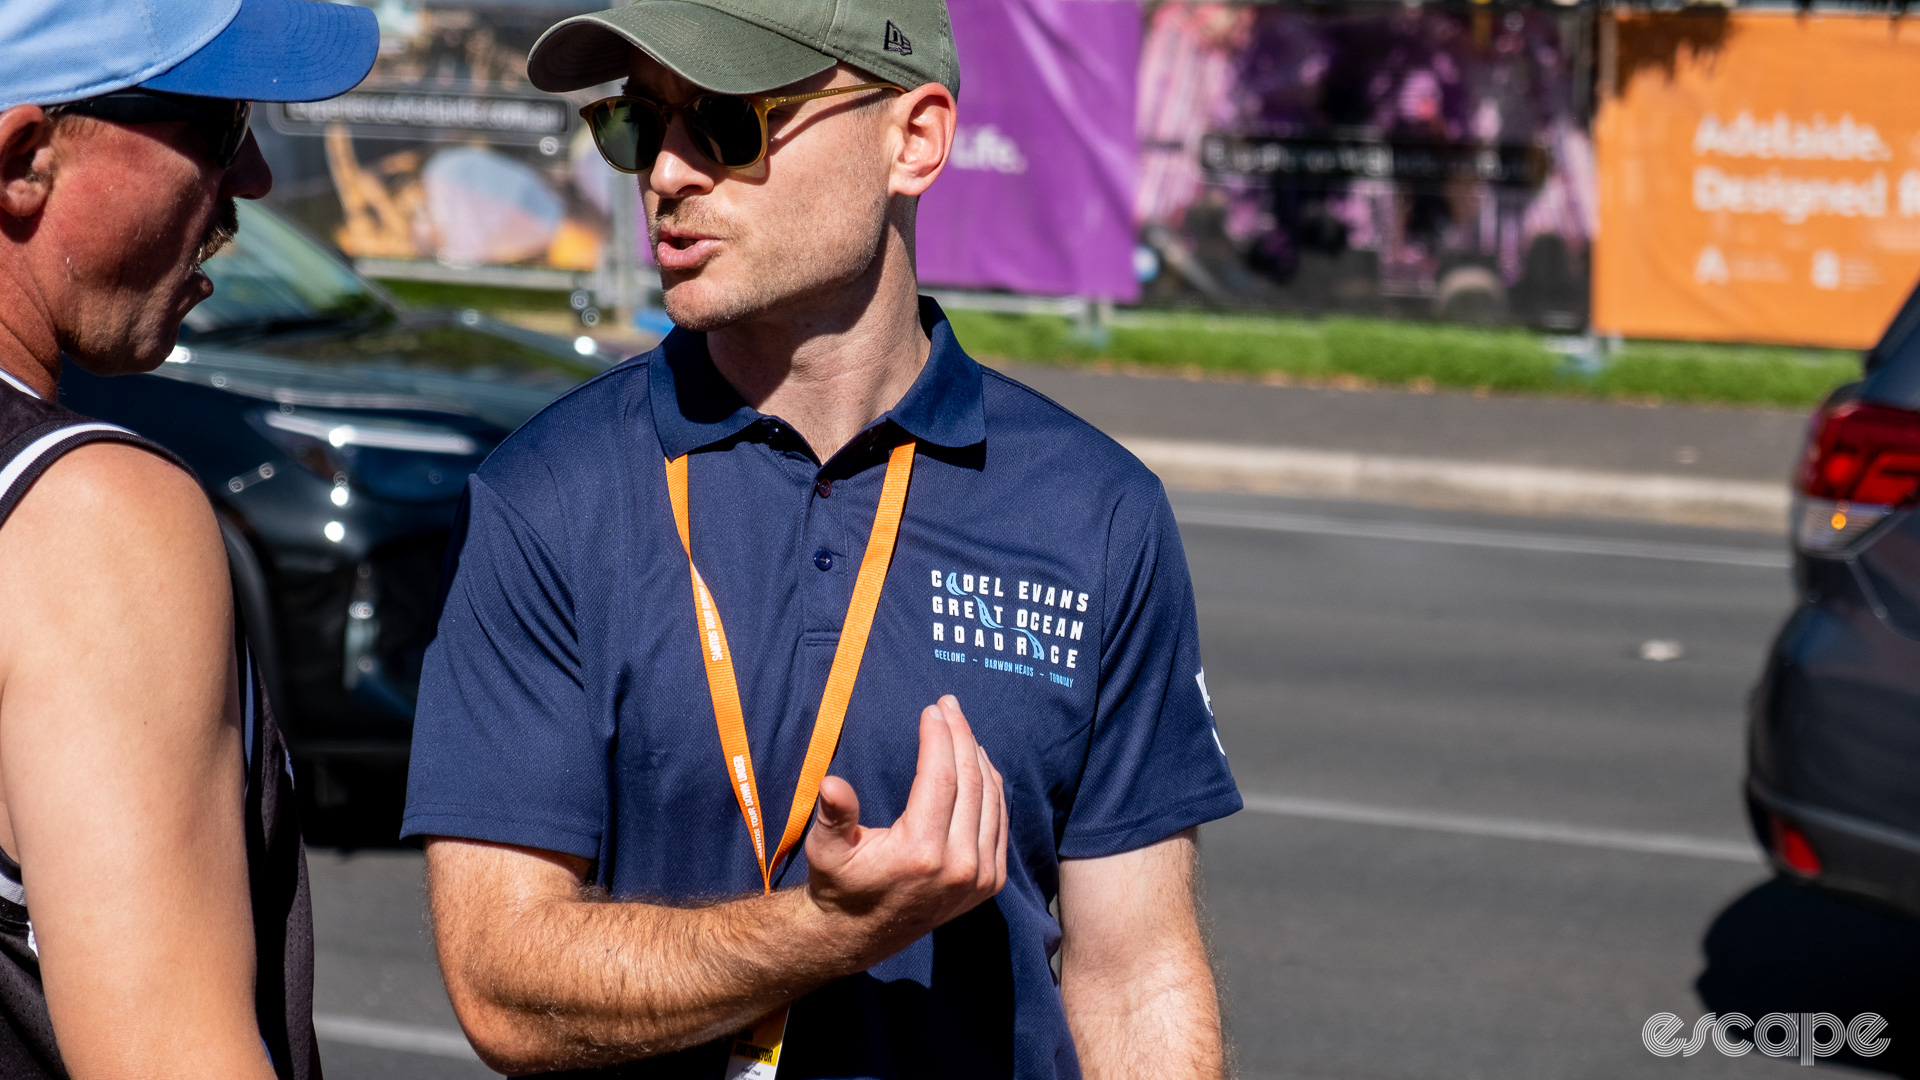 The photo shows a Cadel Evans Great Ocean Race logistics organisers